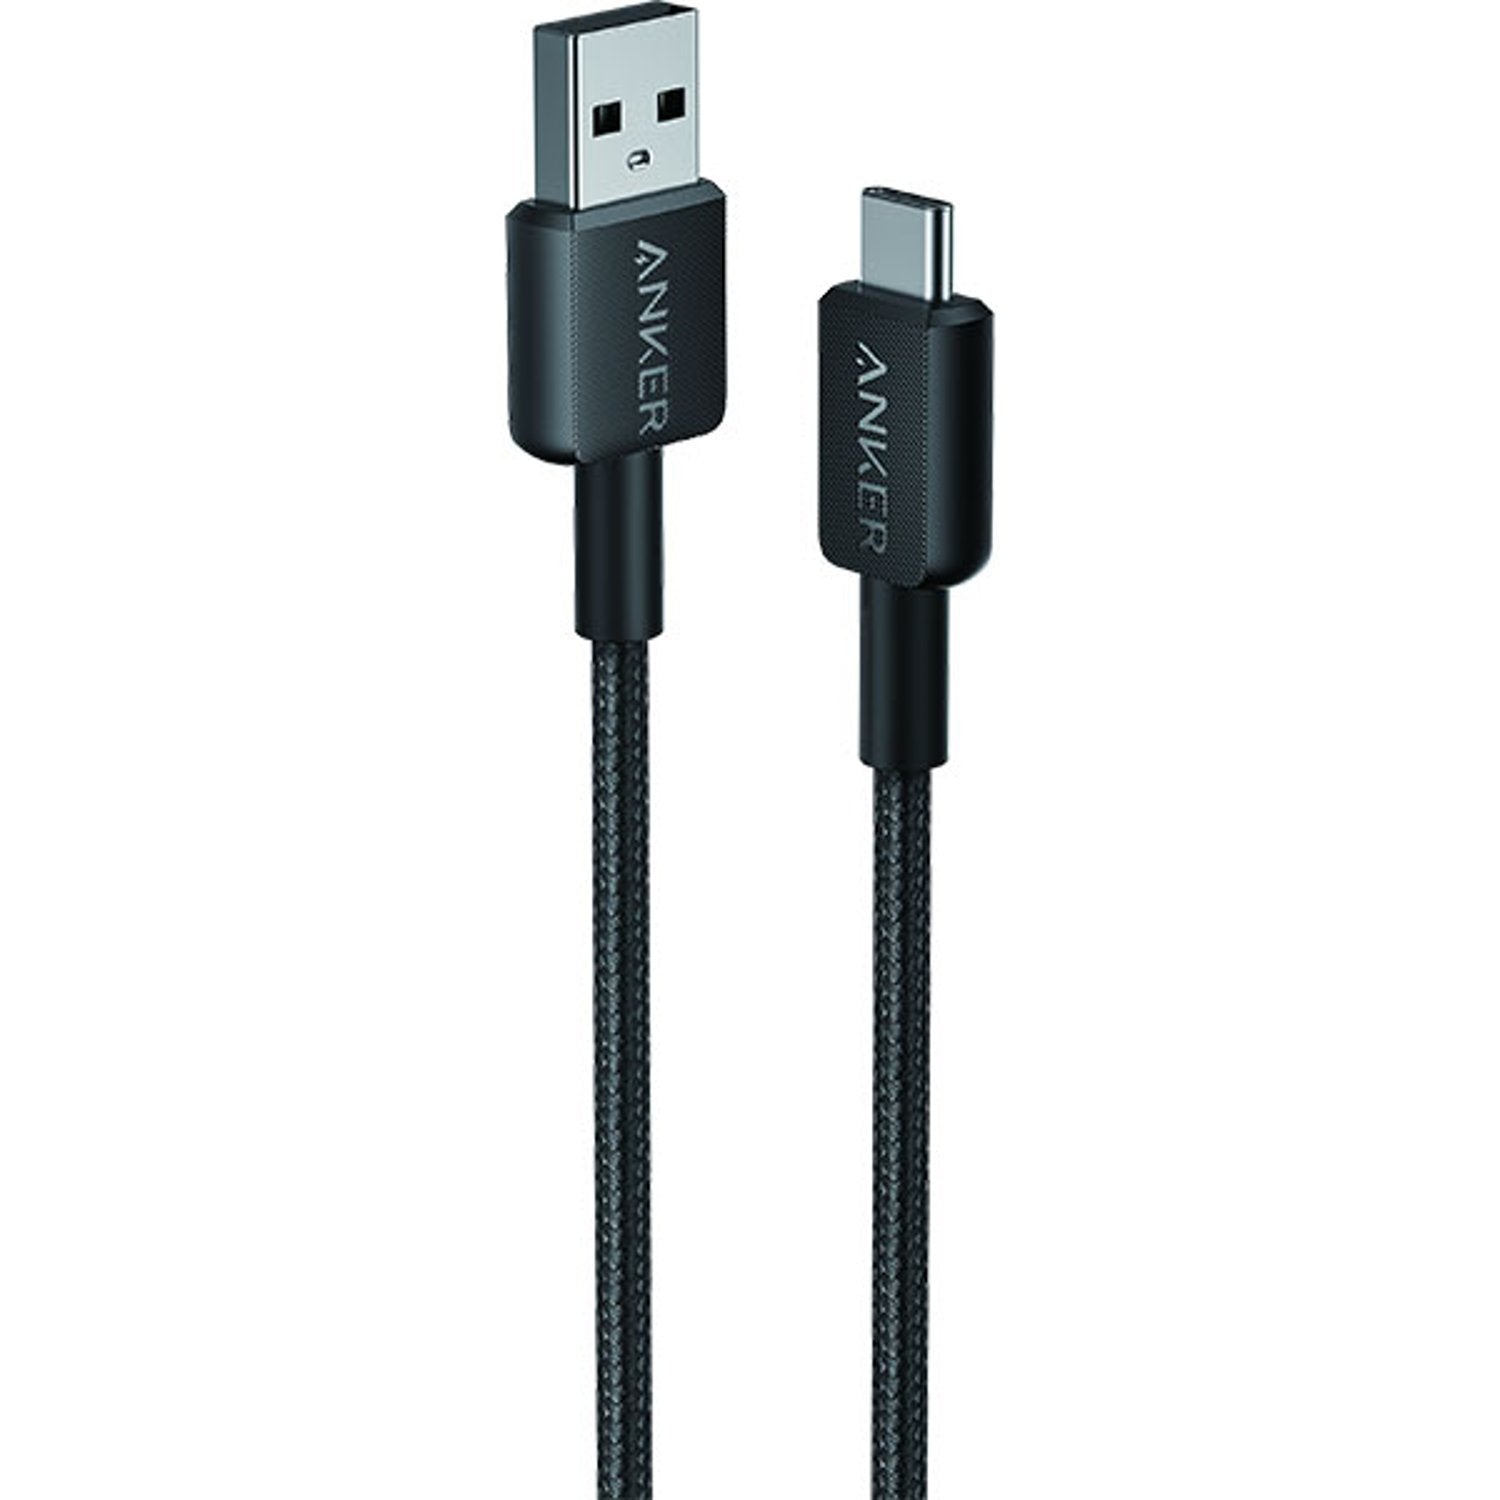 Anker 322 USB-A to USB-C Cable (6ft Braided) - Black Iteration 1